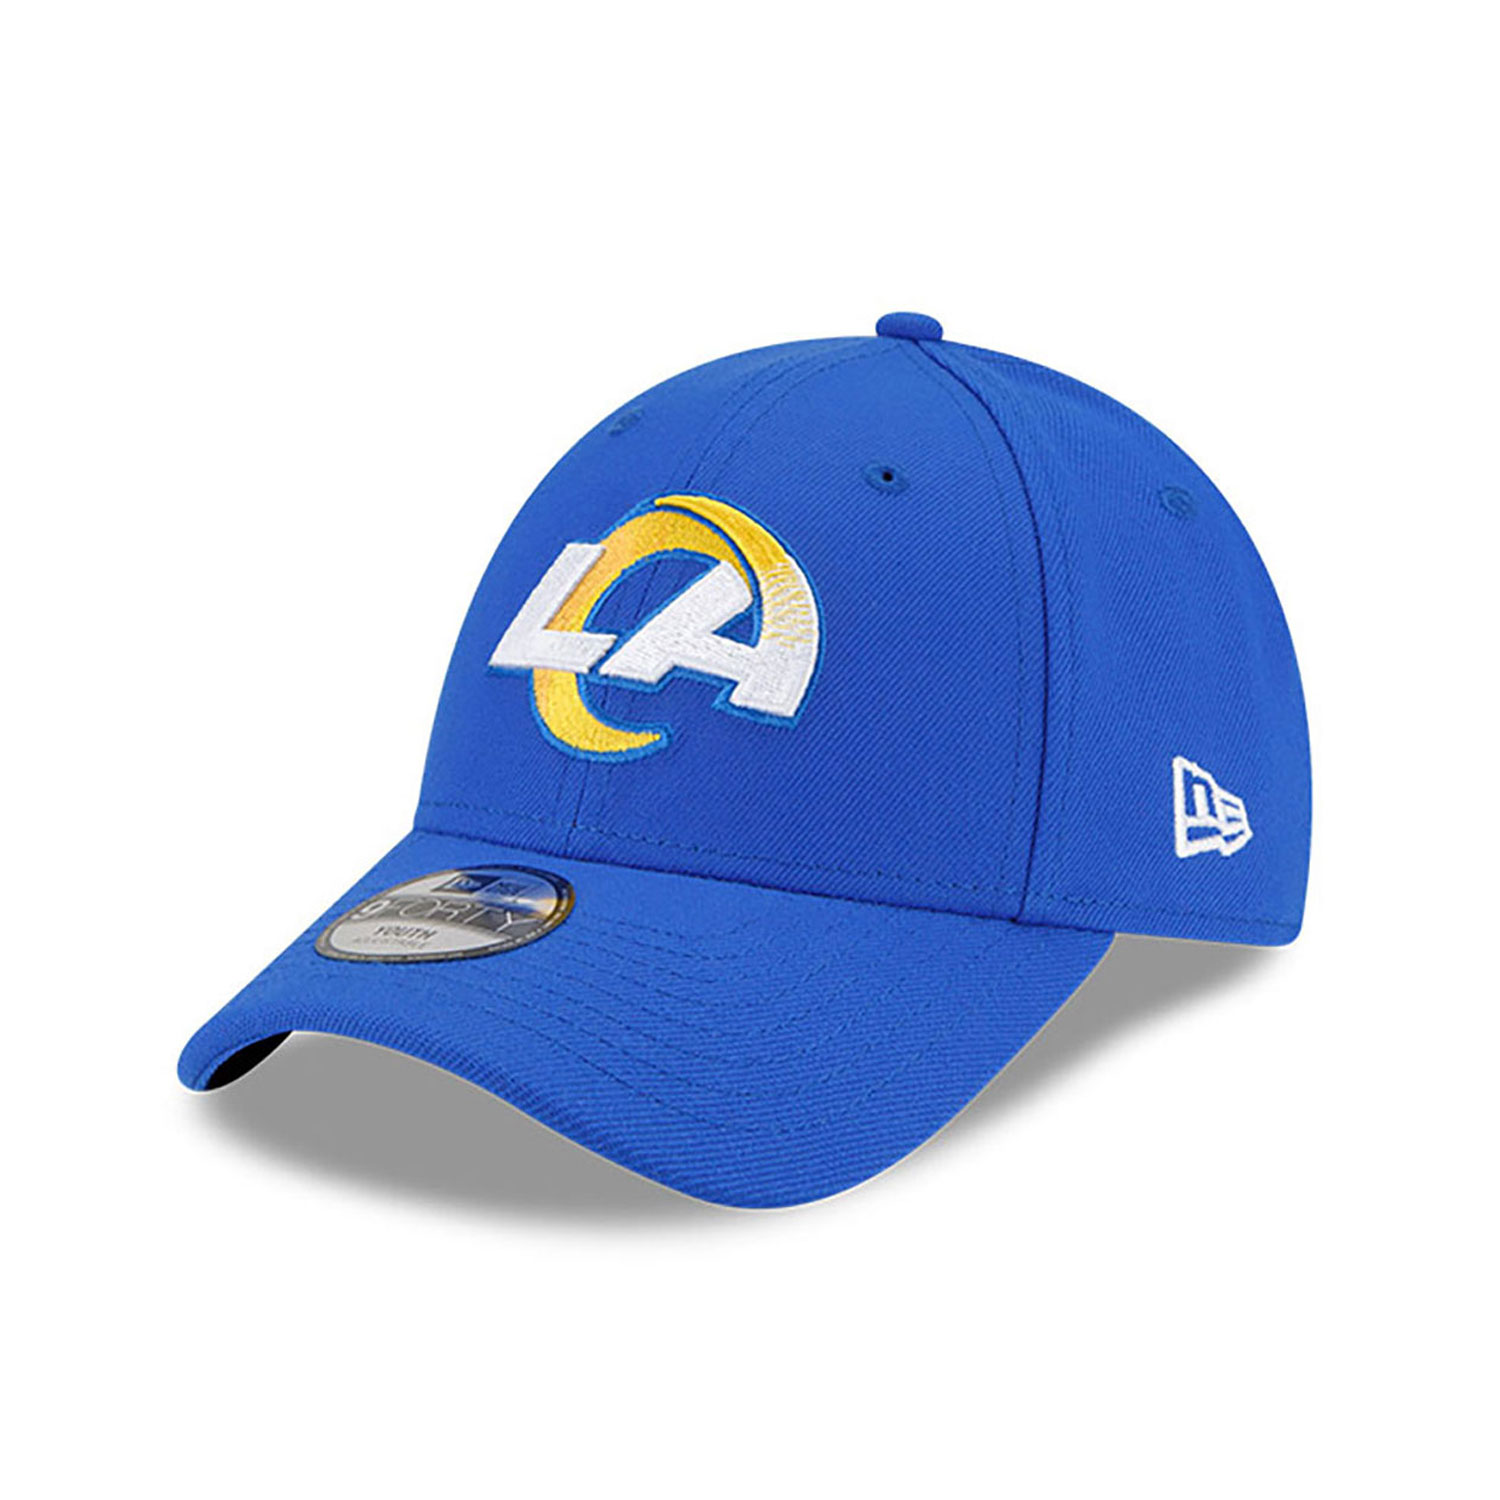 LA Rams Youth The League Blue 9FORTY Adjustable Cap